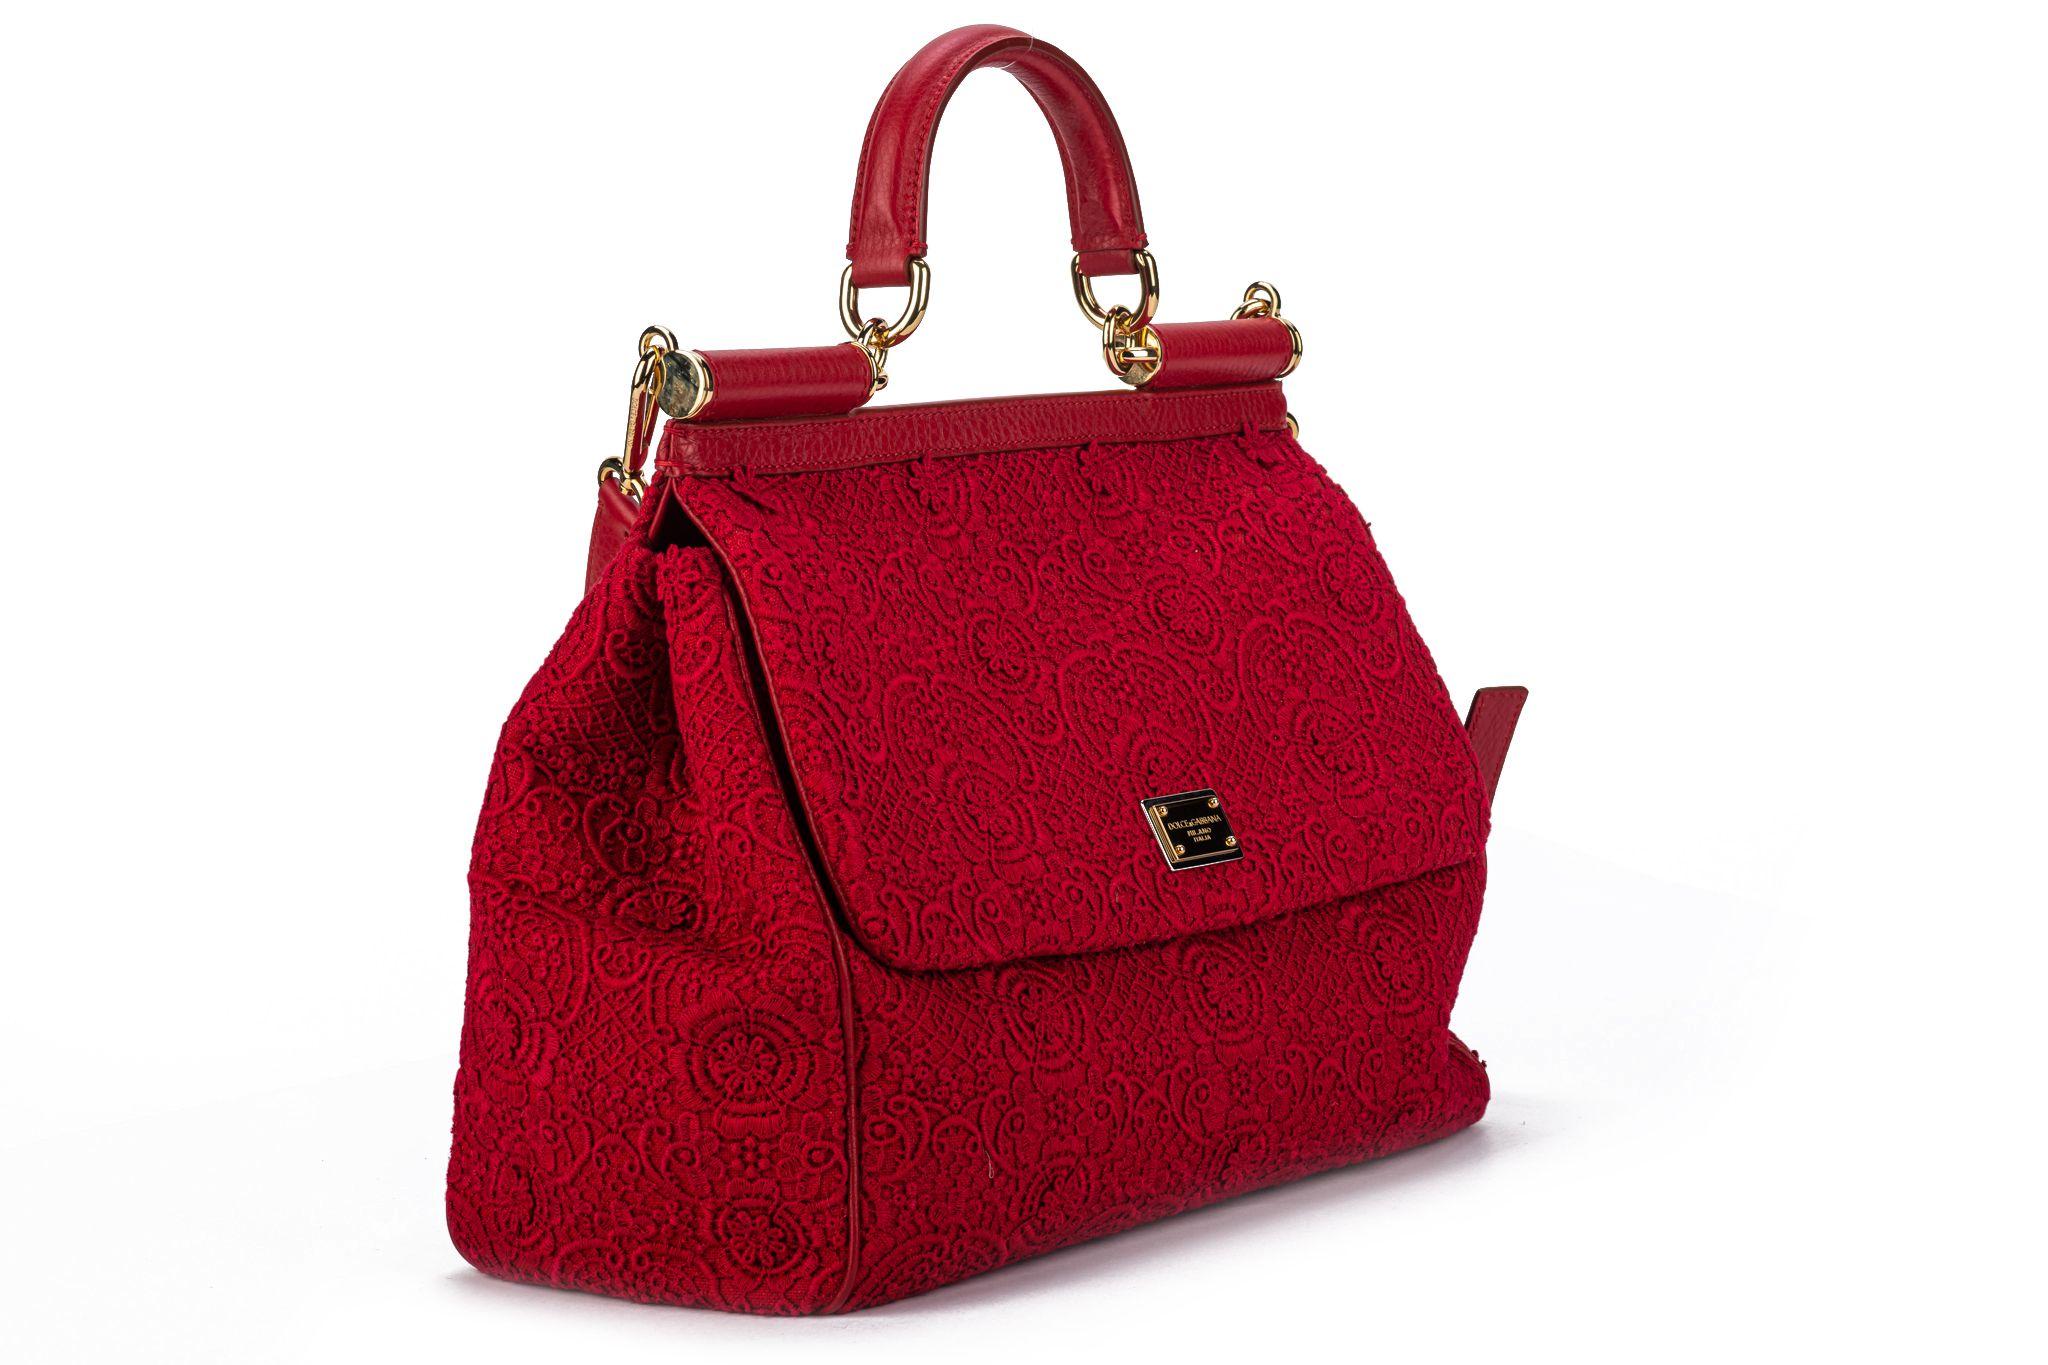 Dolce & Gabbana new large red macrame’ bag , adjustable and detachable strap. Comes with ID card and booklet.